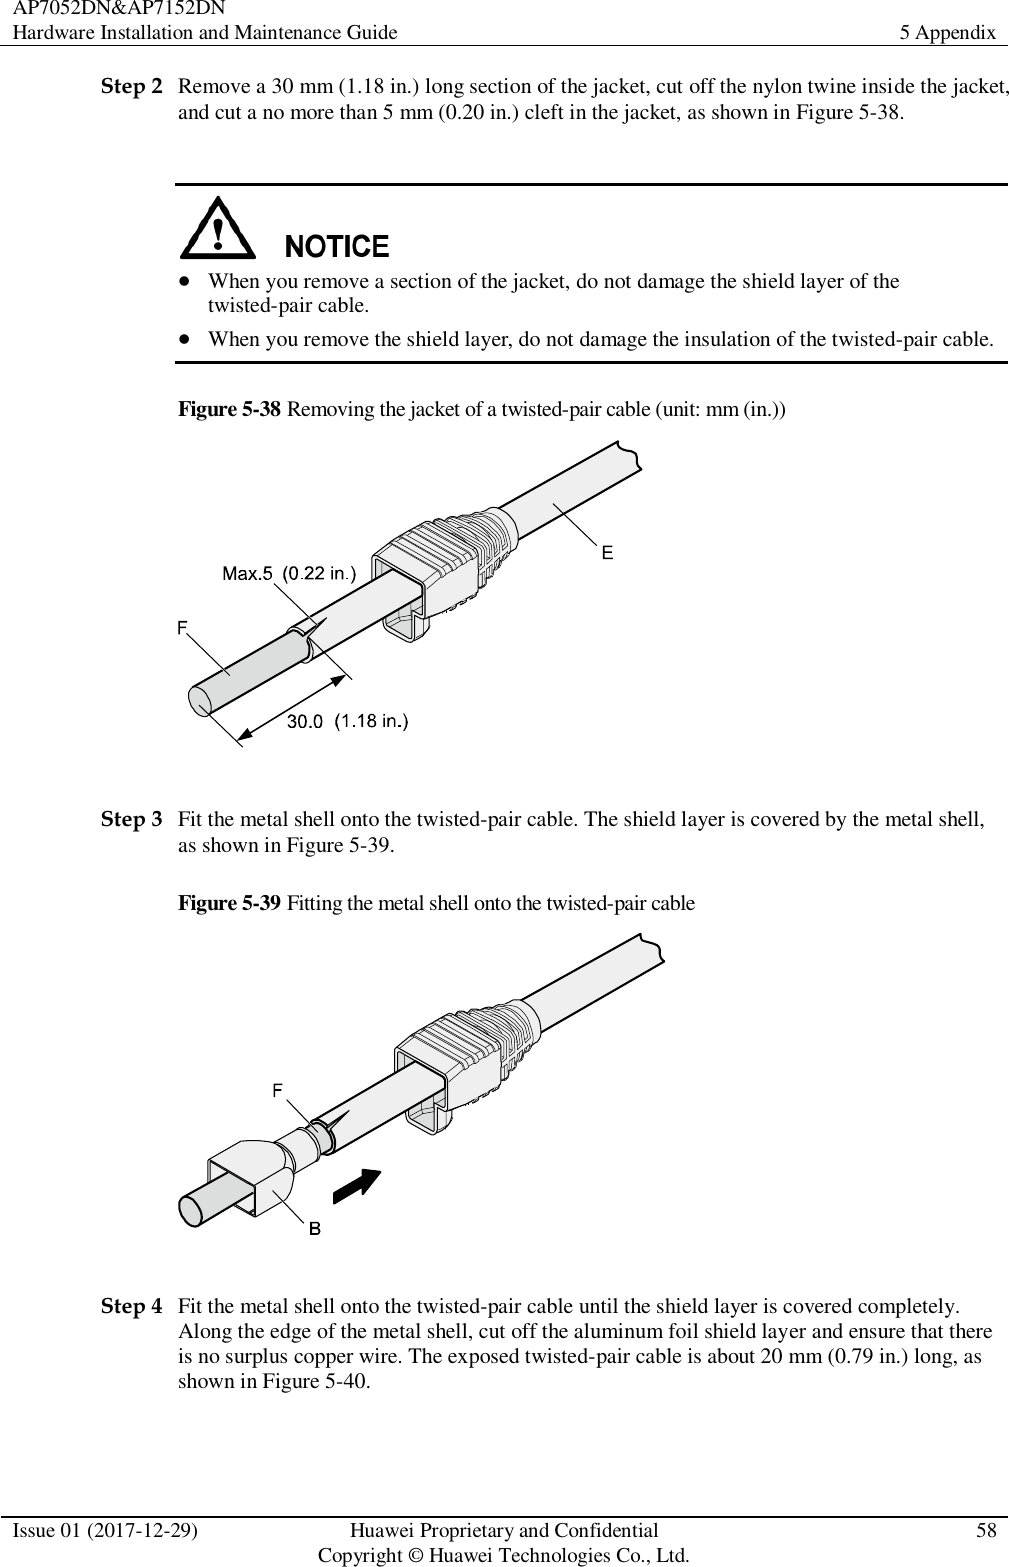 AP7052DN&amp;AP7152DN Hardware Installation and Maintenance Guide 5 Appendix  Issue 01 (2017-12-29) Huawei Proprietary and Confidential                                     Copyright © Huawei Technologies Co., Ltd. 58  Step 2 Remove a 30 mm (1.18 in.) long section of the jacket, cut off the nylon twine inside the jacket, and cut a no more than 5 mm (0.20 in.) cleft in the jacket, as shown in Figure 5-38.    When you remove a section of the jacket, do not damage the shield layer of the twisted-pair cable.  When you remove the shield layer, do not damage the insulation of the twisted-pair cable. Figure 5-38 Removing the jacket of a twisted-pair cable (unit: mm (in.))   Step 3 Fit the metal shell onto the twisted-pair cable. The shield layer is covered by the metal shell, as shown in Figure 5-39. Figure 5-39 Fitting the metal shell onto the twisted-pair cable   Step 4 Fit the metal shell onto the twisted-pair cable until the shield layer is covered completely. Along the edge of the metal shell, cut off the aluminum foil shield layer and ensure that there is no surplus copper wire. The exposed twisted-pair cable is about 20 mm (0.79 in.) long, as shown in Figure 5-40. 